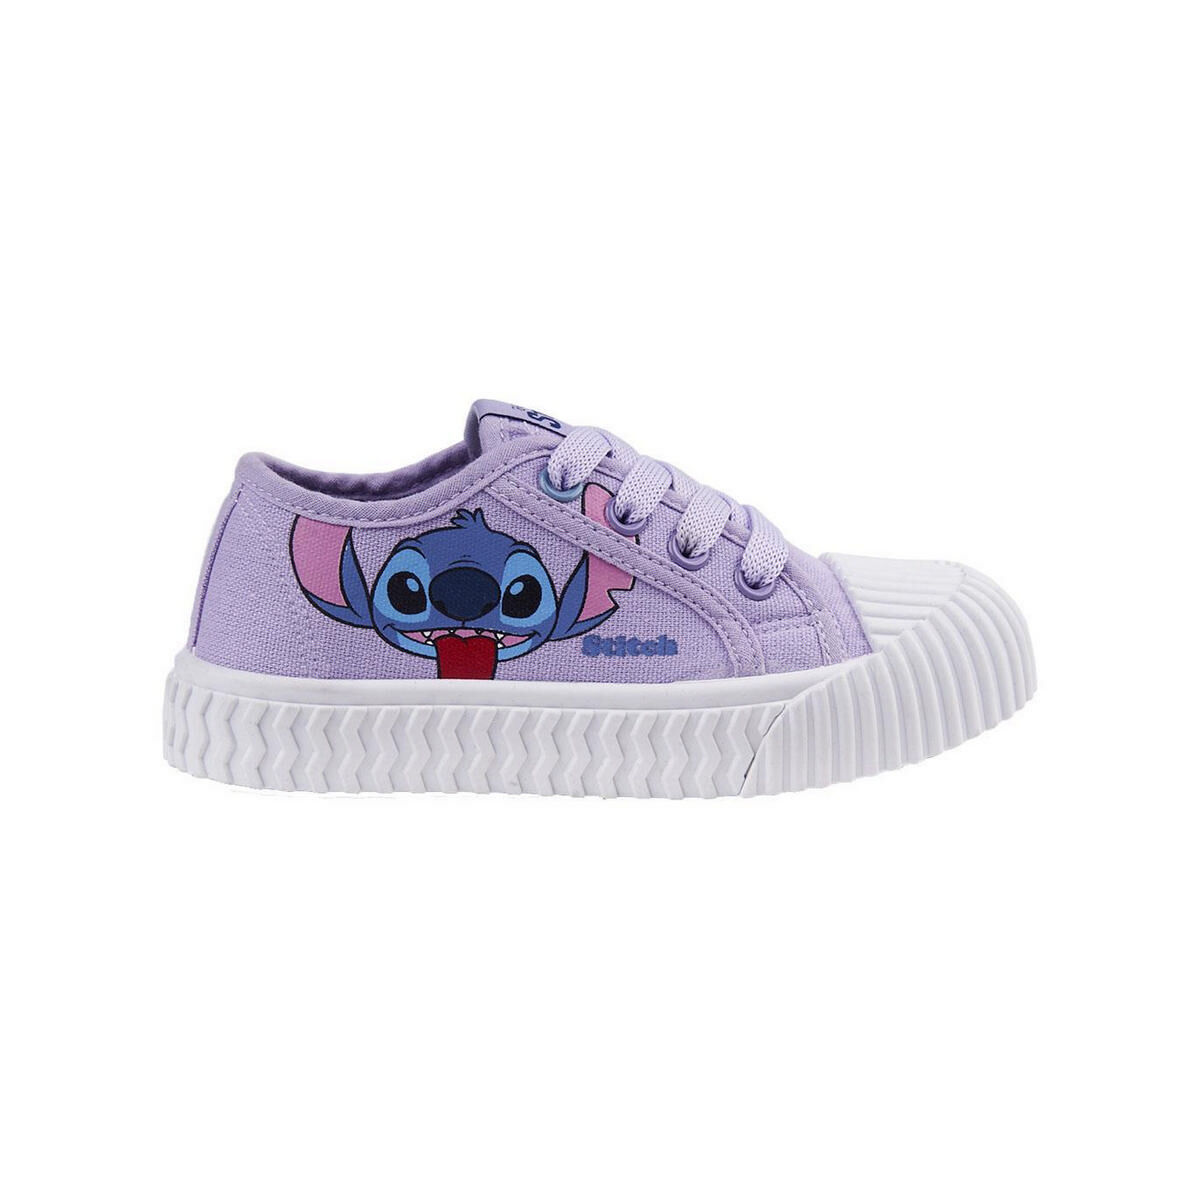 Chaussures casual enfant Stitch Lila